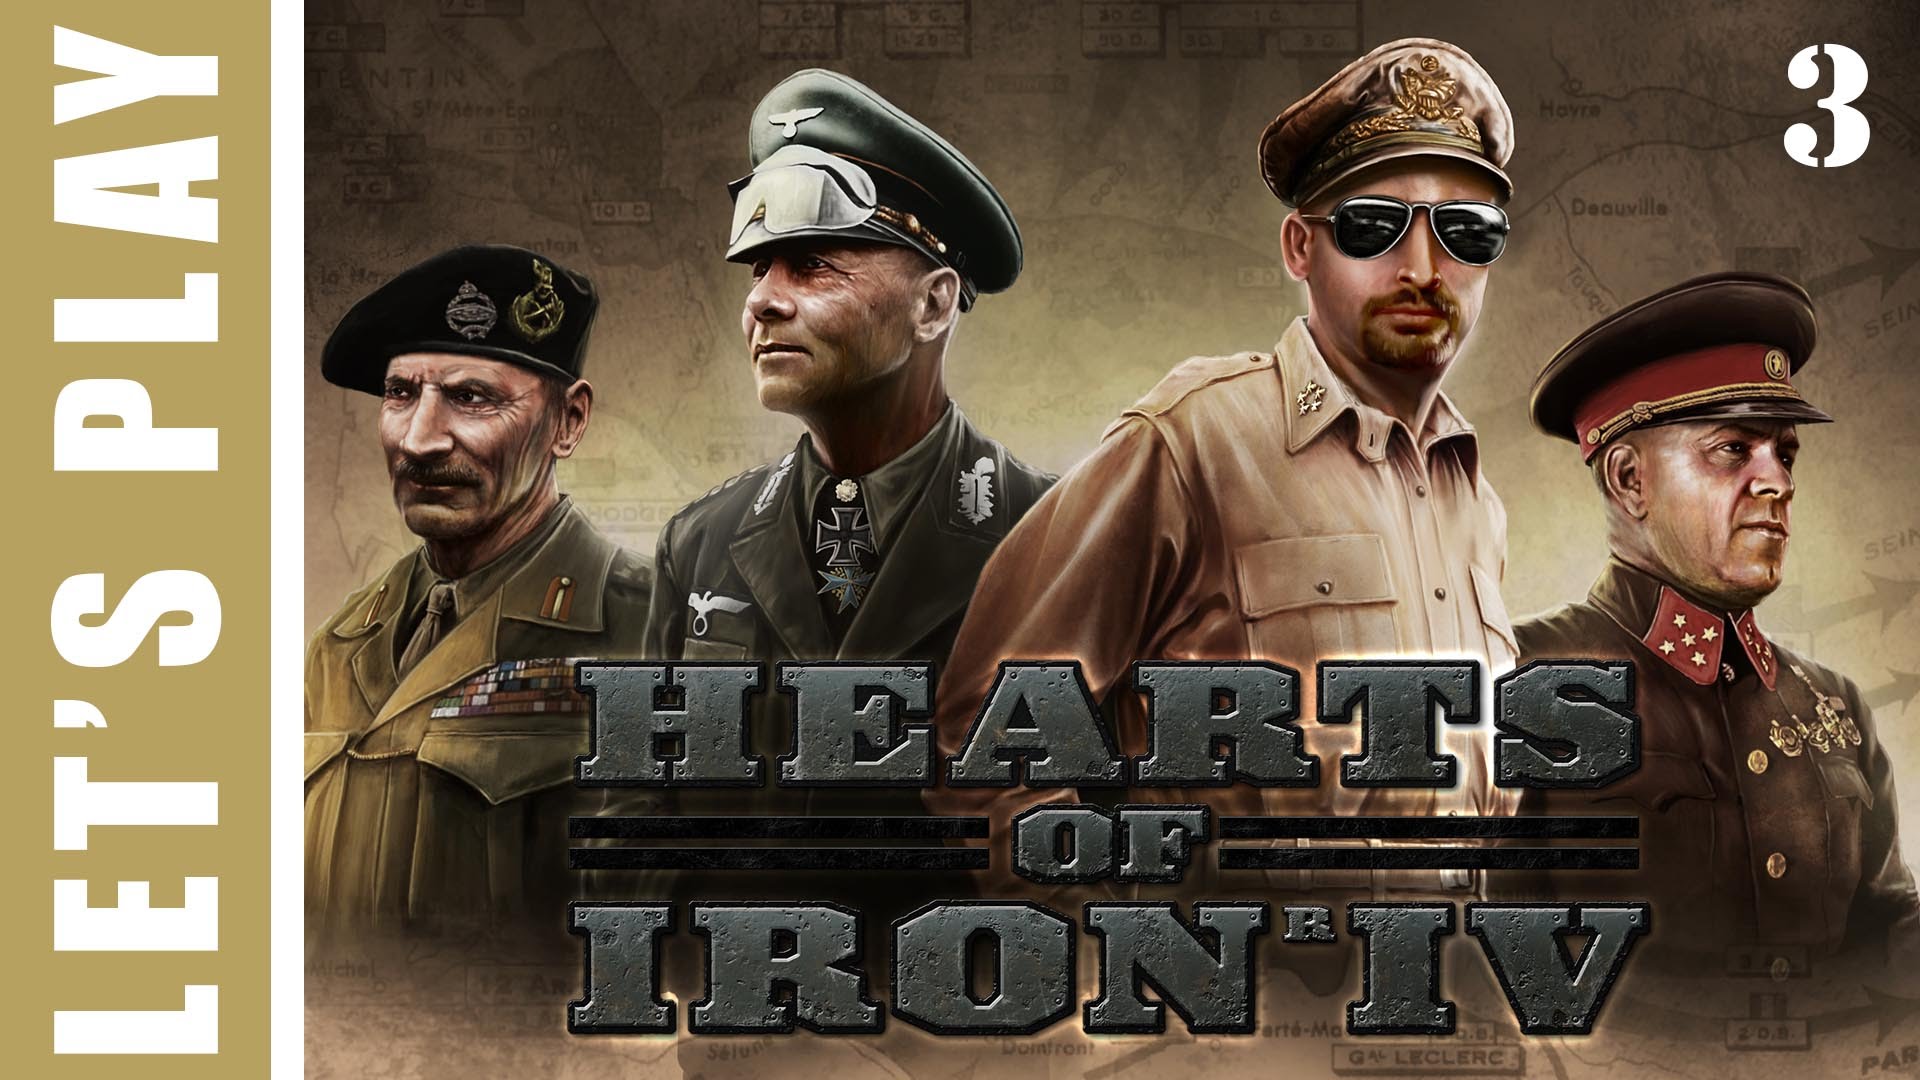 Hearts of Iron IV Germany Wins World War 2 Let’s Play 3